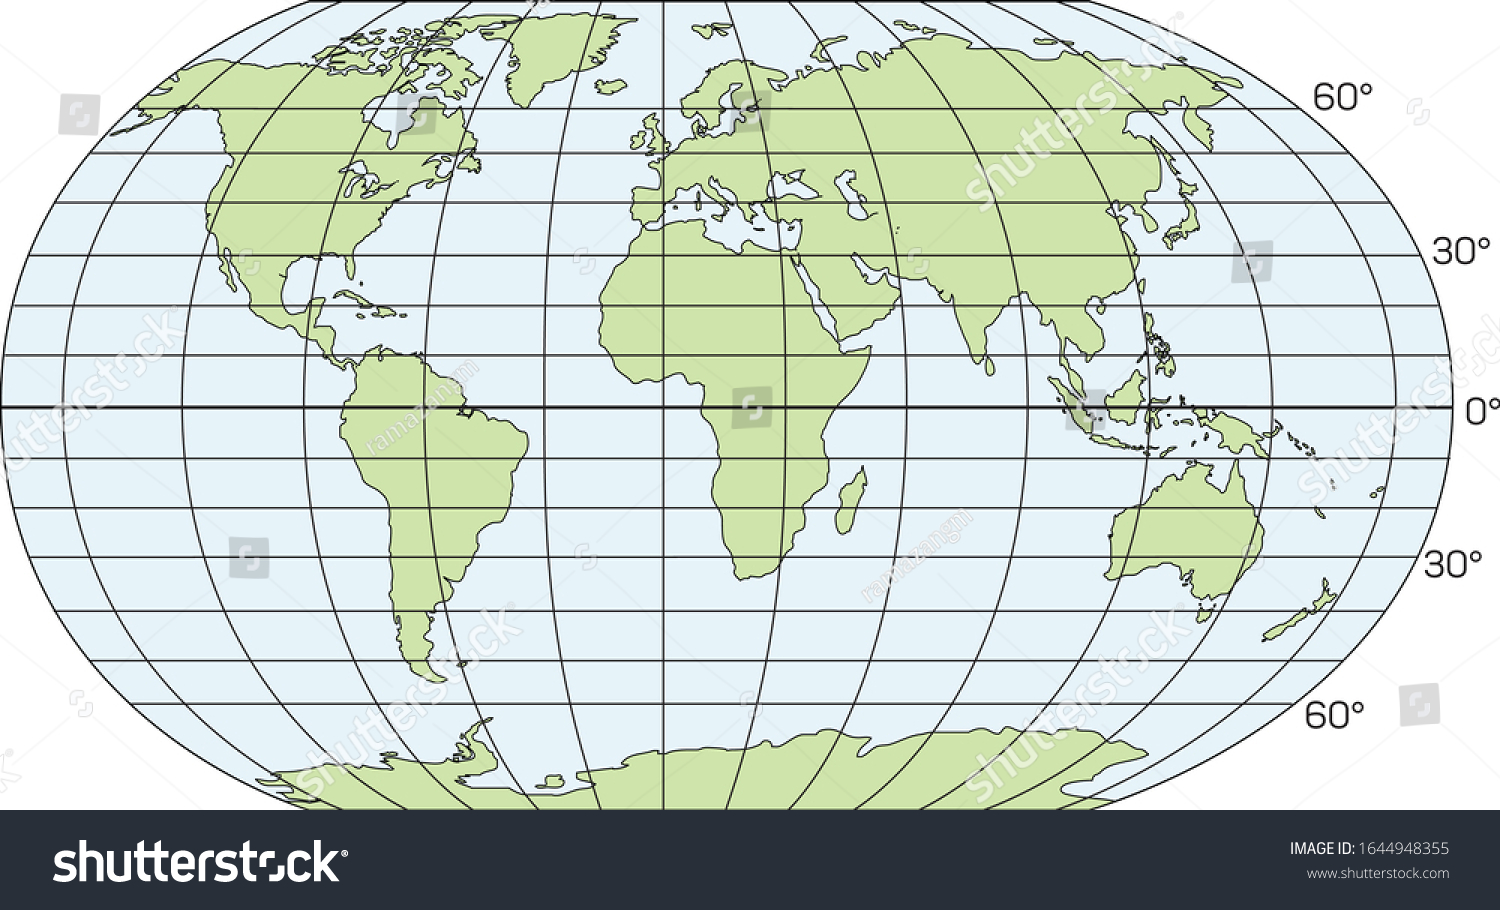 Stock Vector Global Map Showing Longitudes And Latitudes 1644948355 